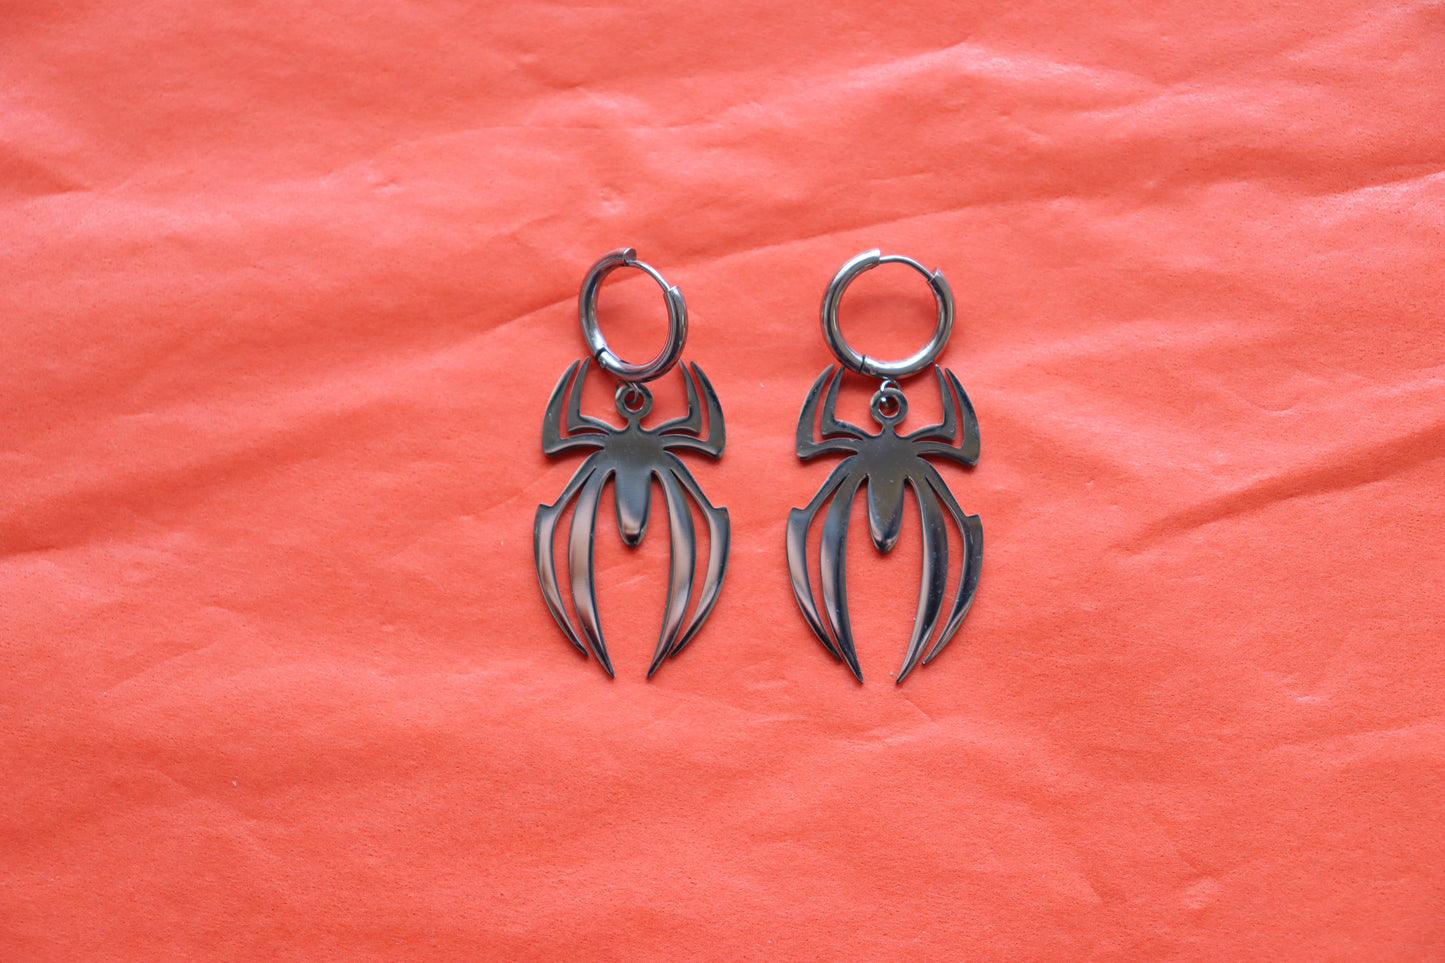 "Wicked Awesome" Spider Titanium Earrings